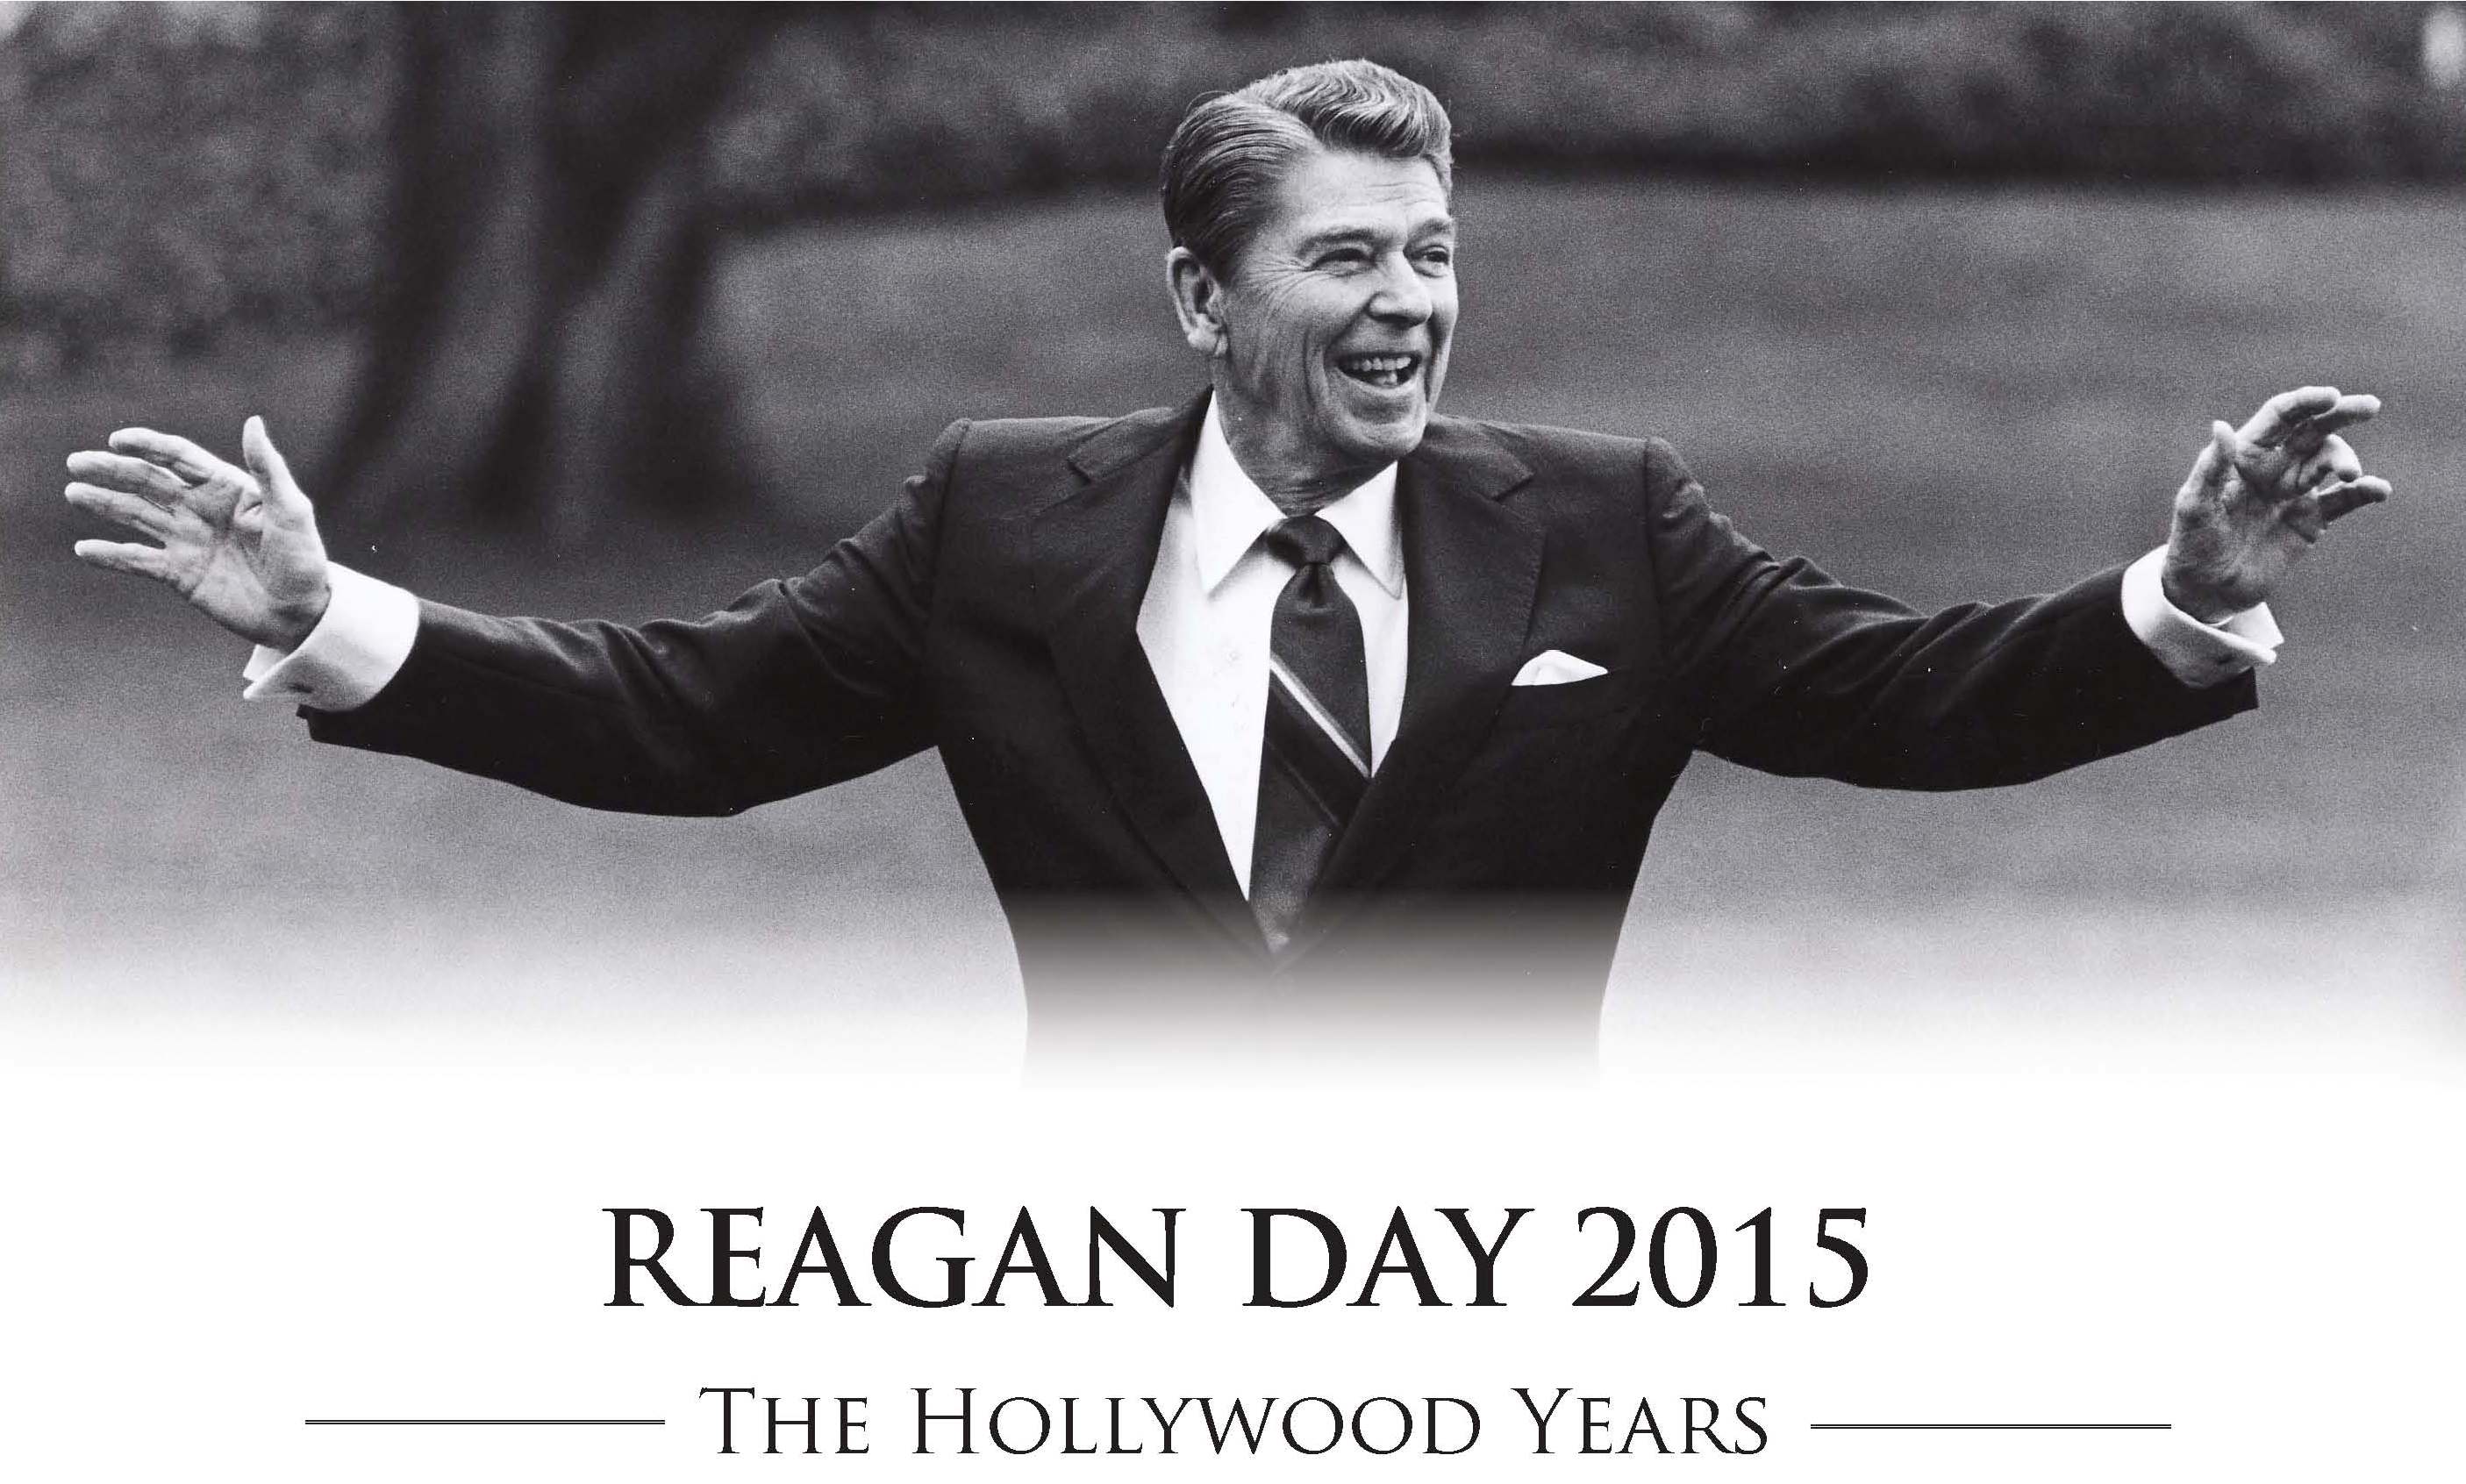 Save the date for Reagan Day 2015